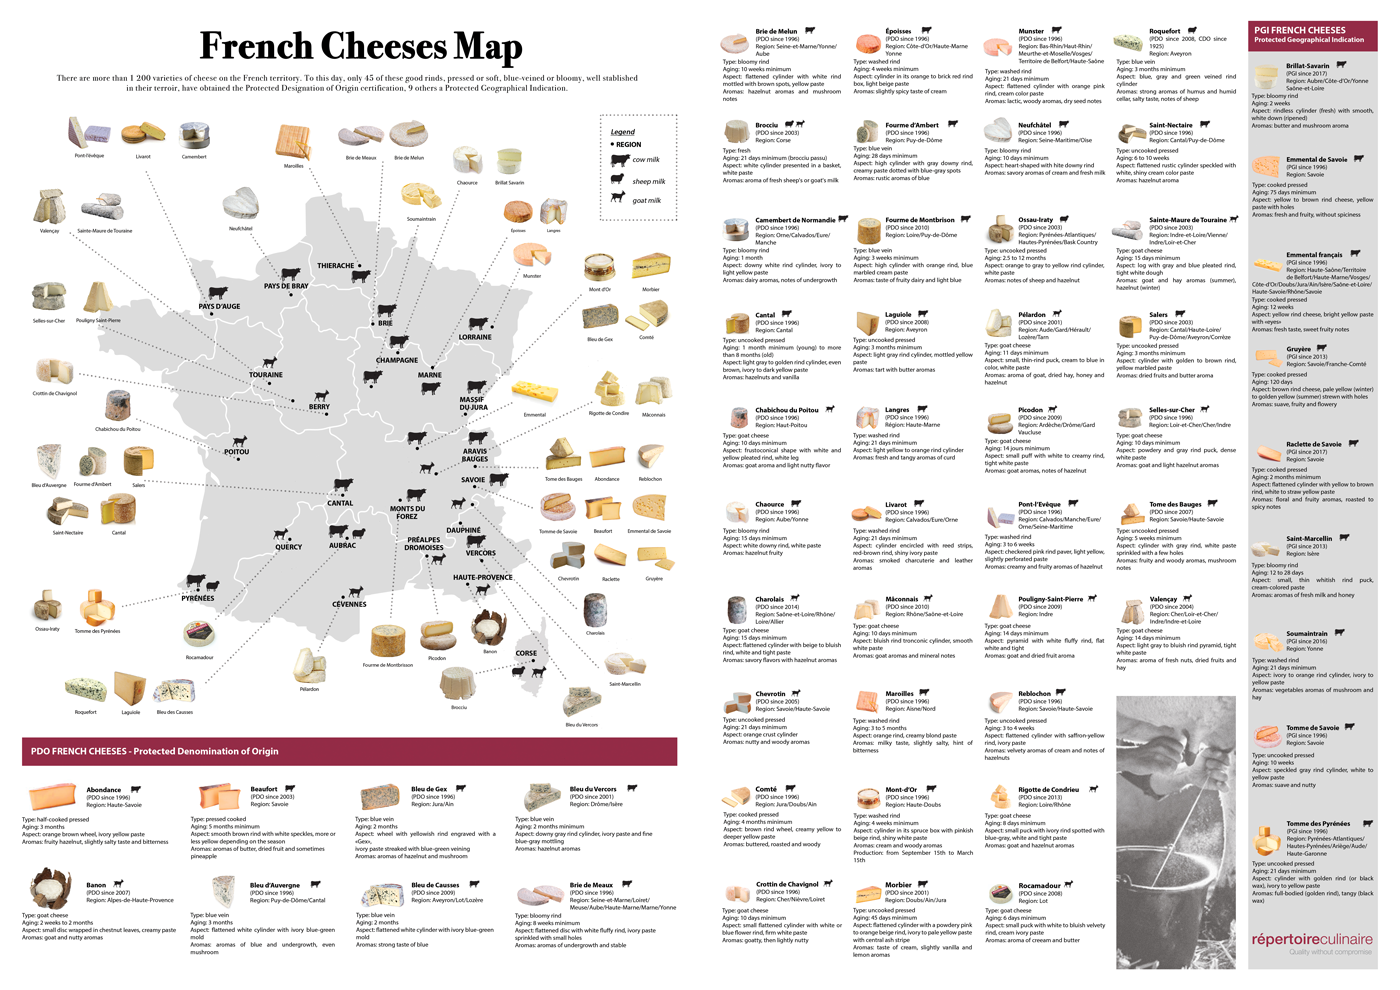 Origins of French Cheese